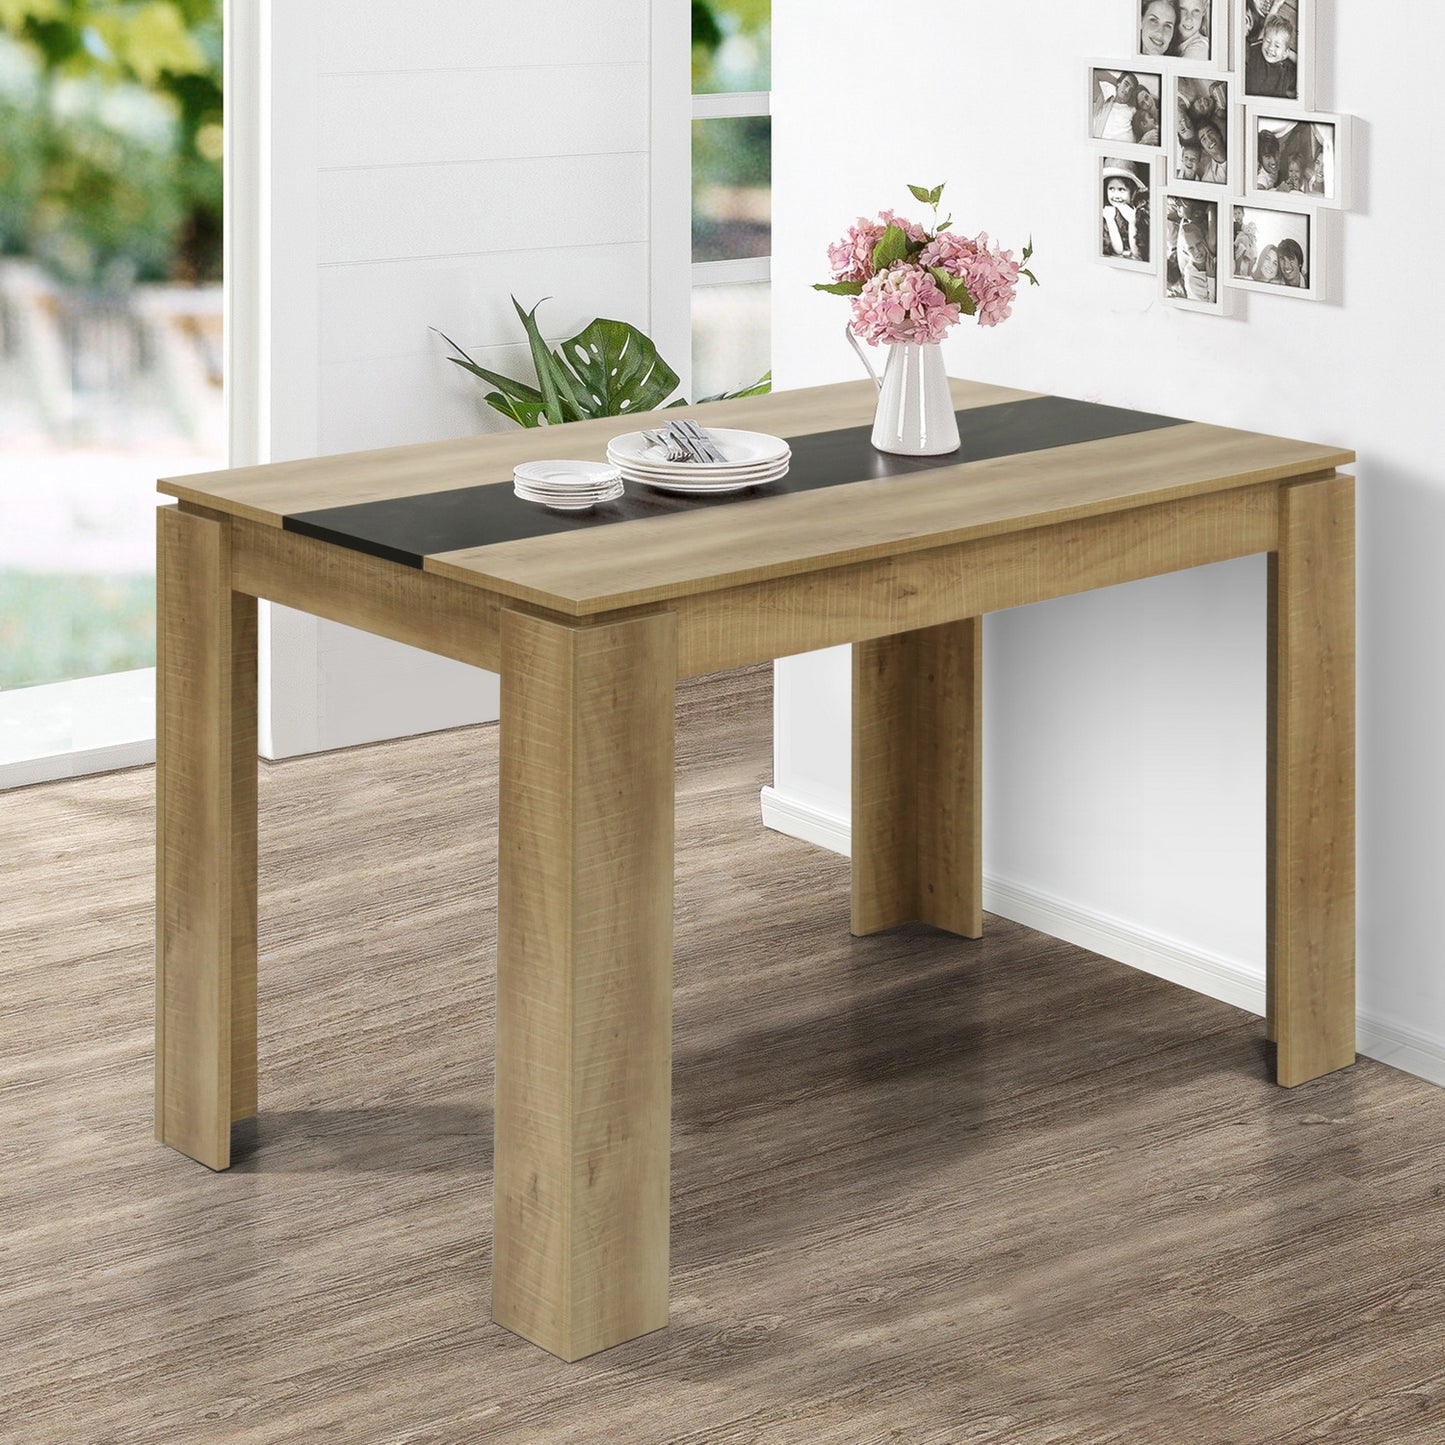 MUSK Dining Table with 110cm - Black